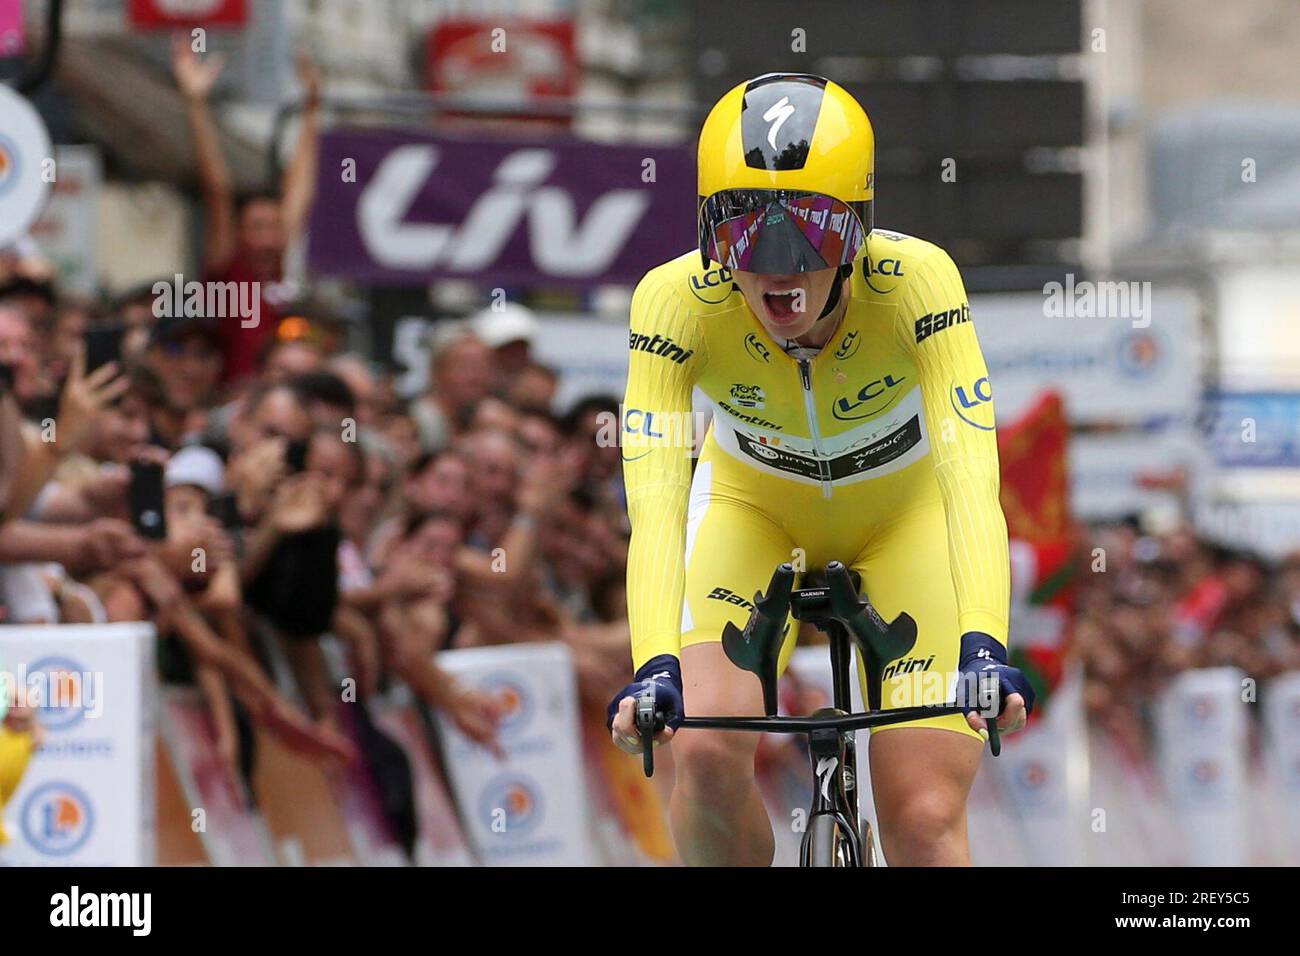 Netherland's Demi Vollering wearing the overall leader's yellow jersey crosses  the finish of the eighth stage of the Tour de France women's cycling race,  an individual time trial over 22.6 kilometers (14